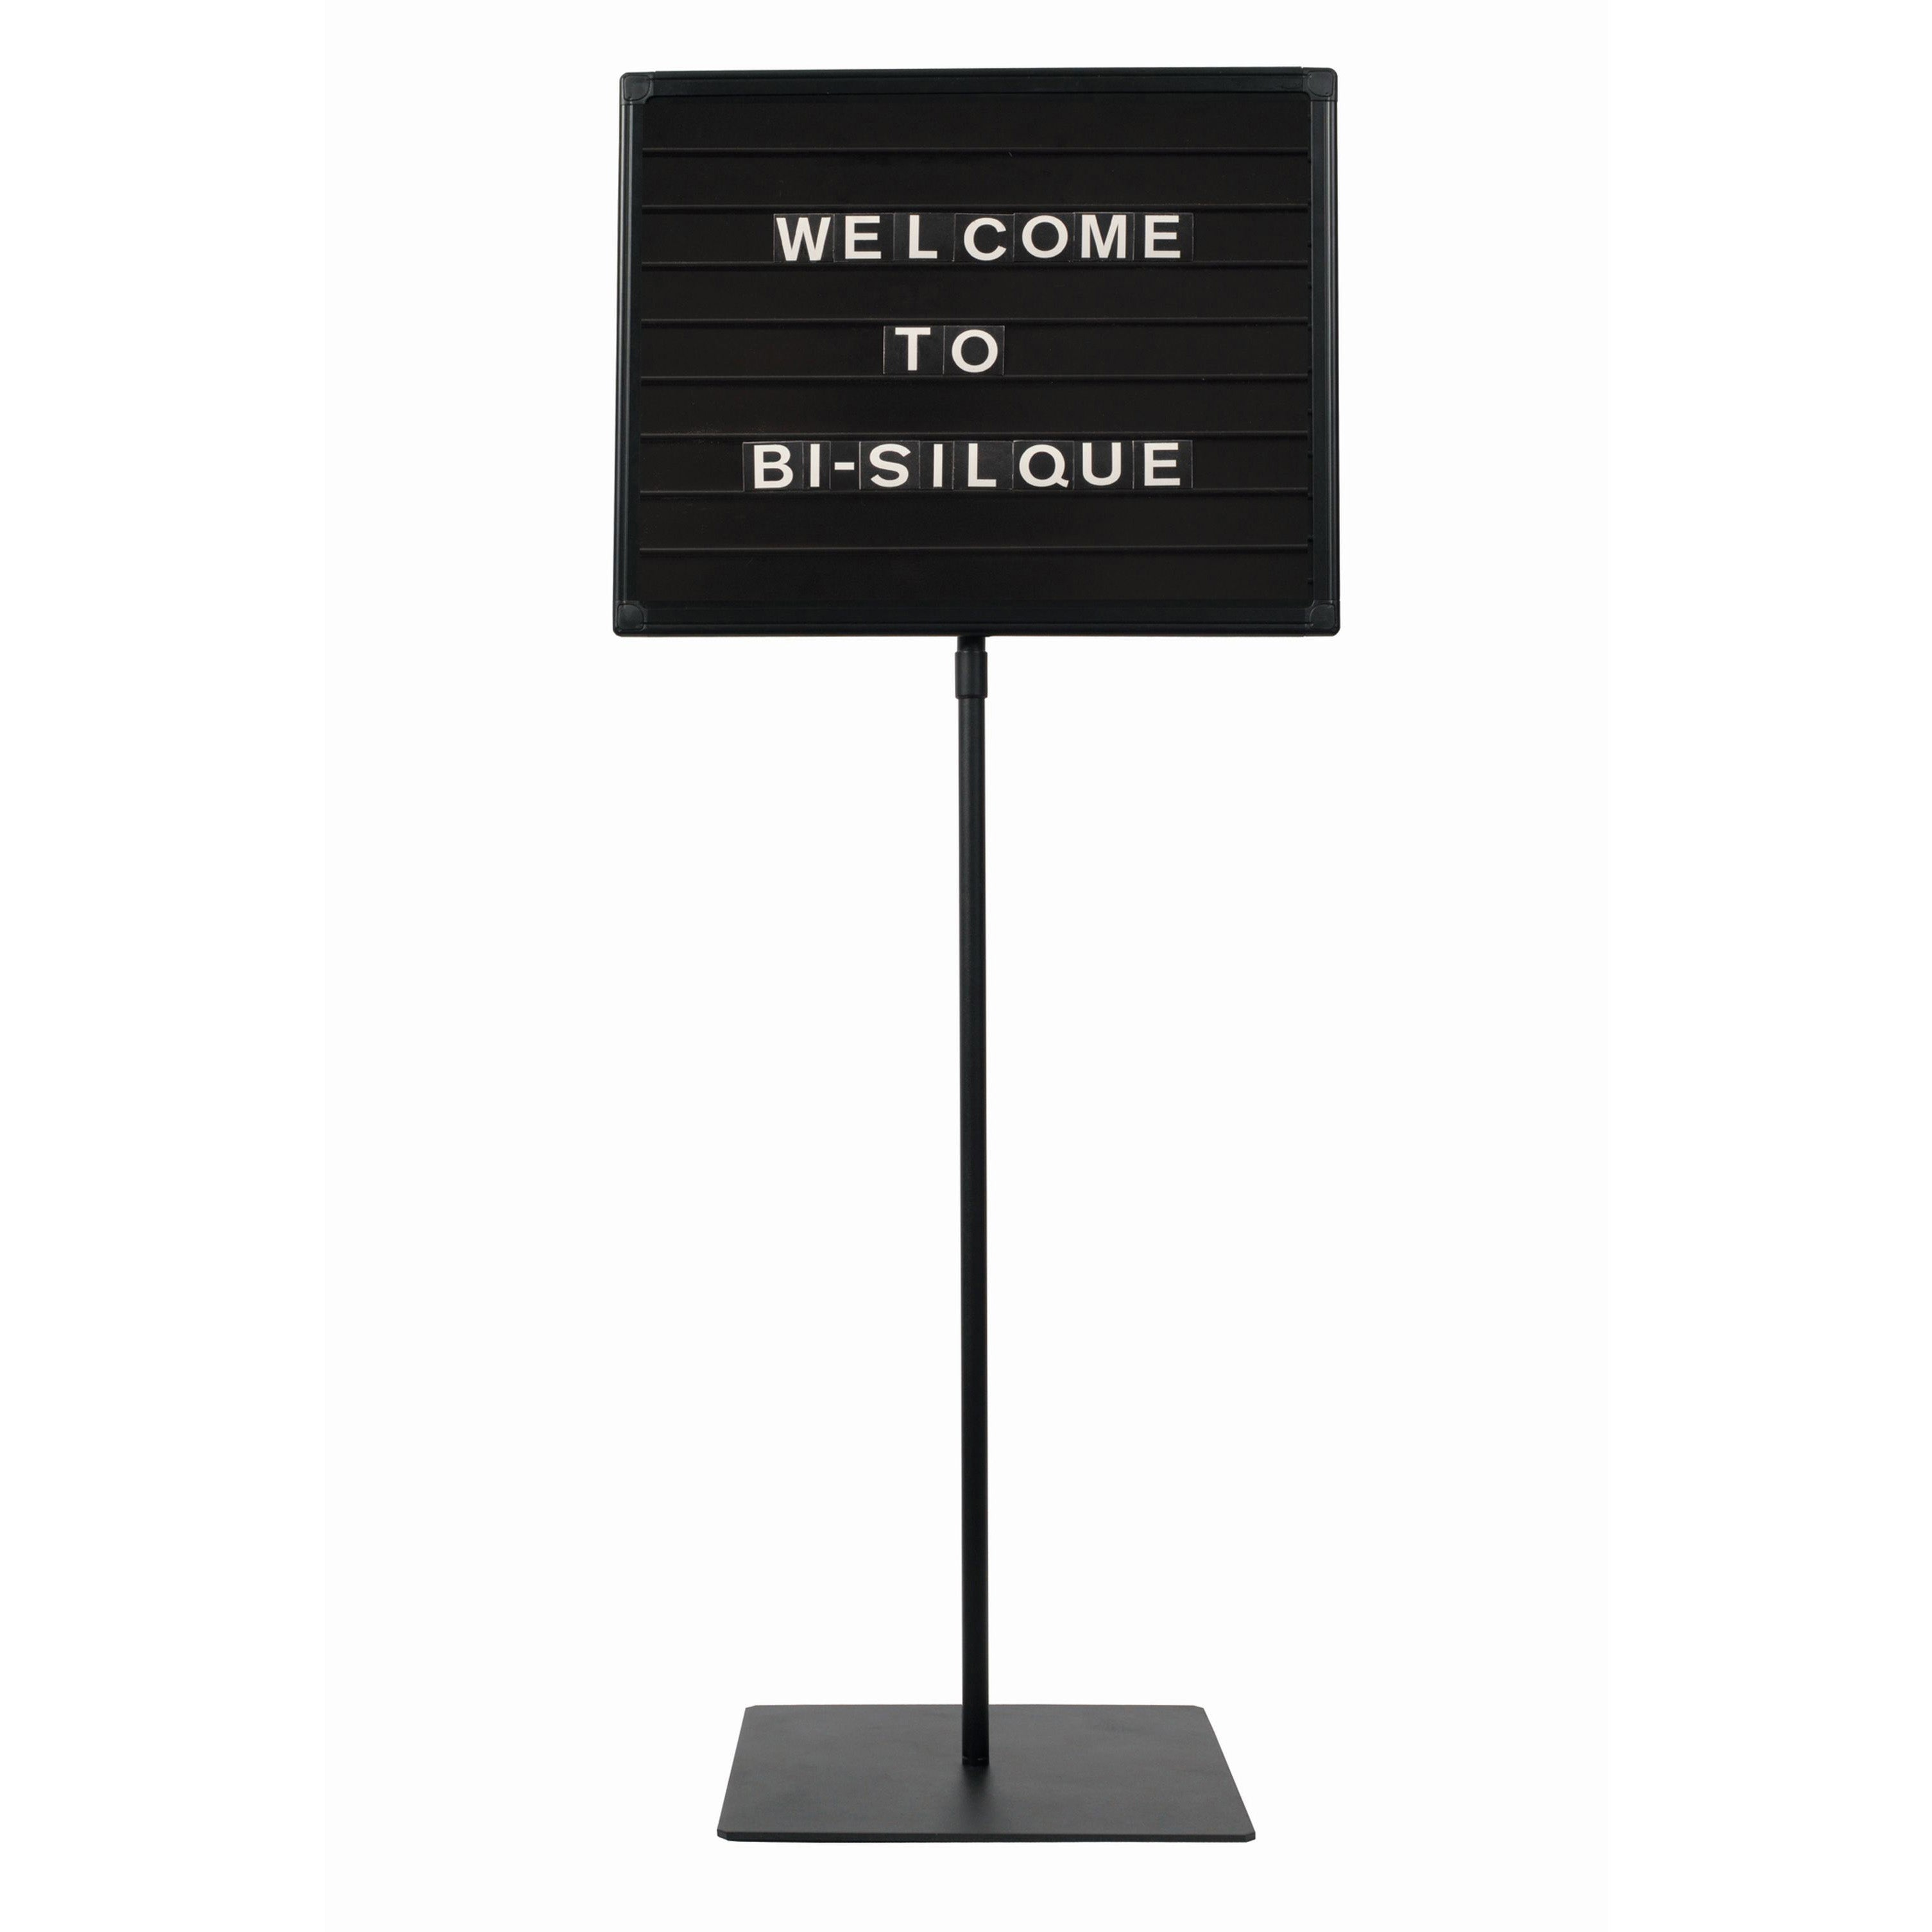 SIG04040404 Magnetic Changeable Letter Message Board with Floor Stand for Commercial, Wedding Halls, Funeral Homes, Conference Centers, 16" x 29" by MasterVision